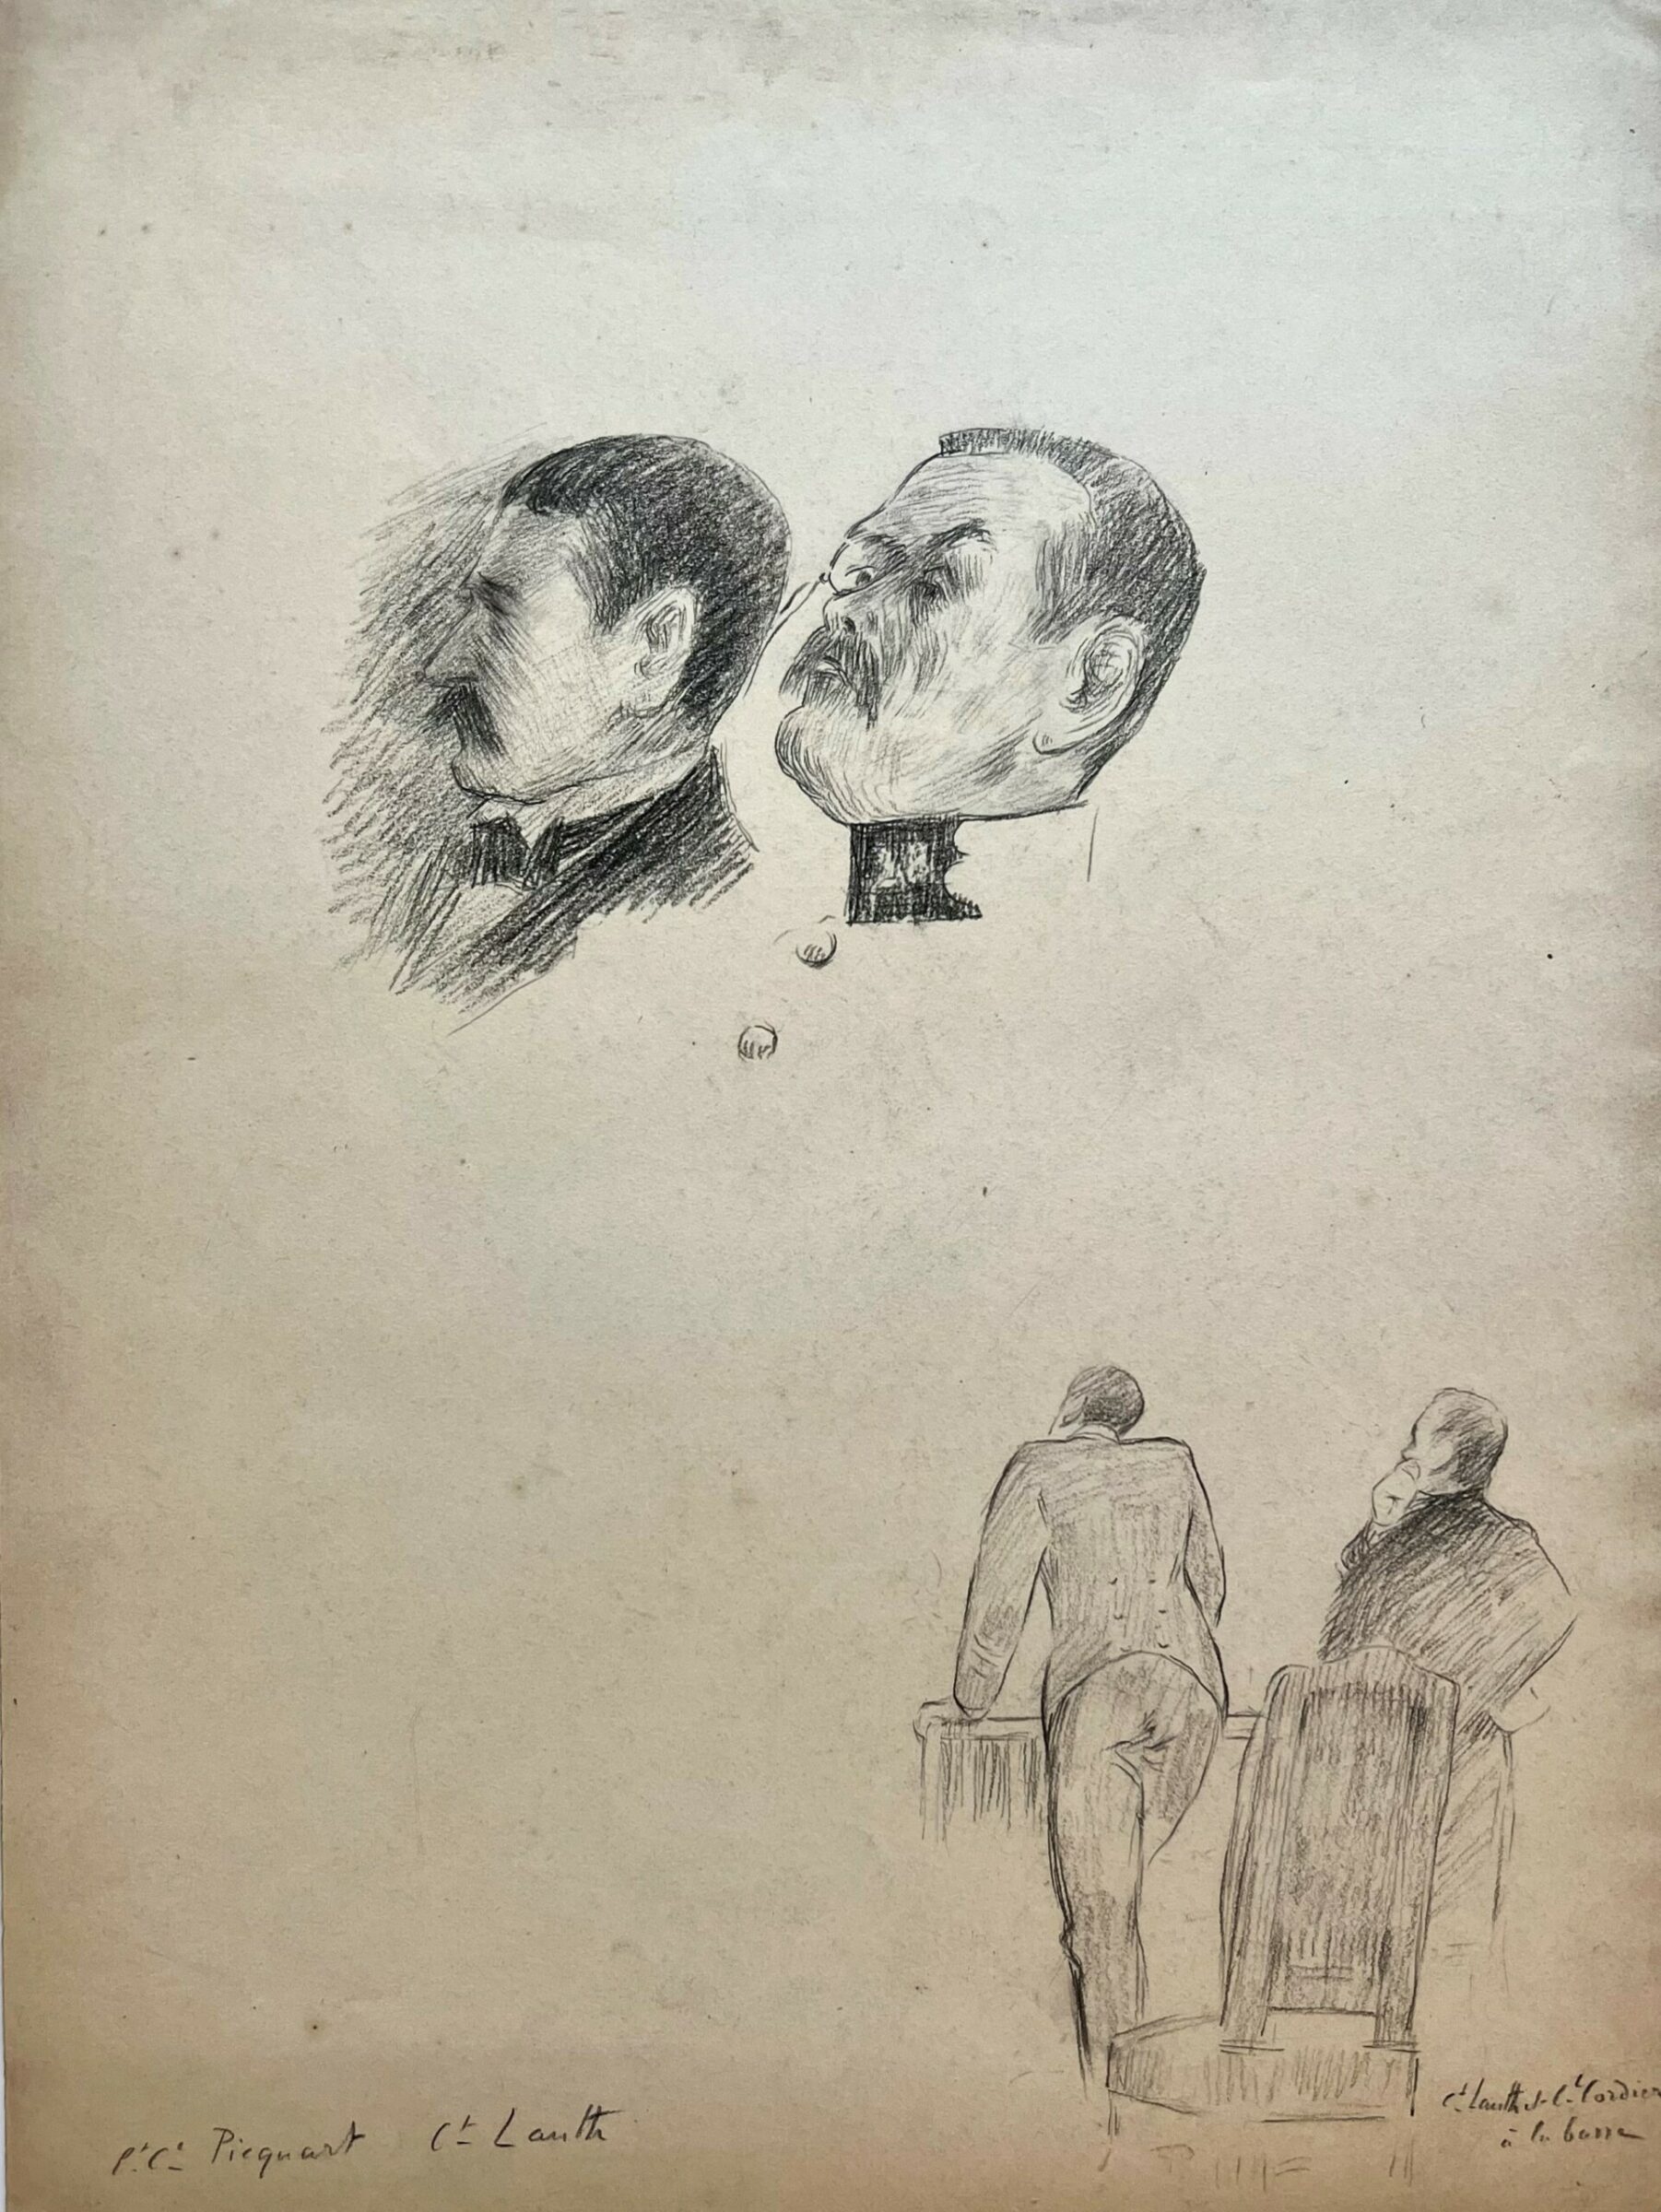 Courtroom Sketch of a Hero and a Villain of the Dreyfus Affair